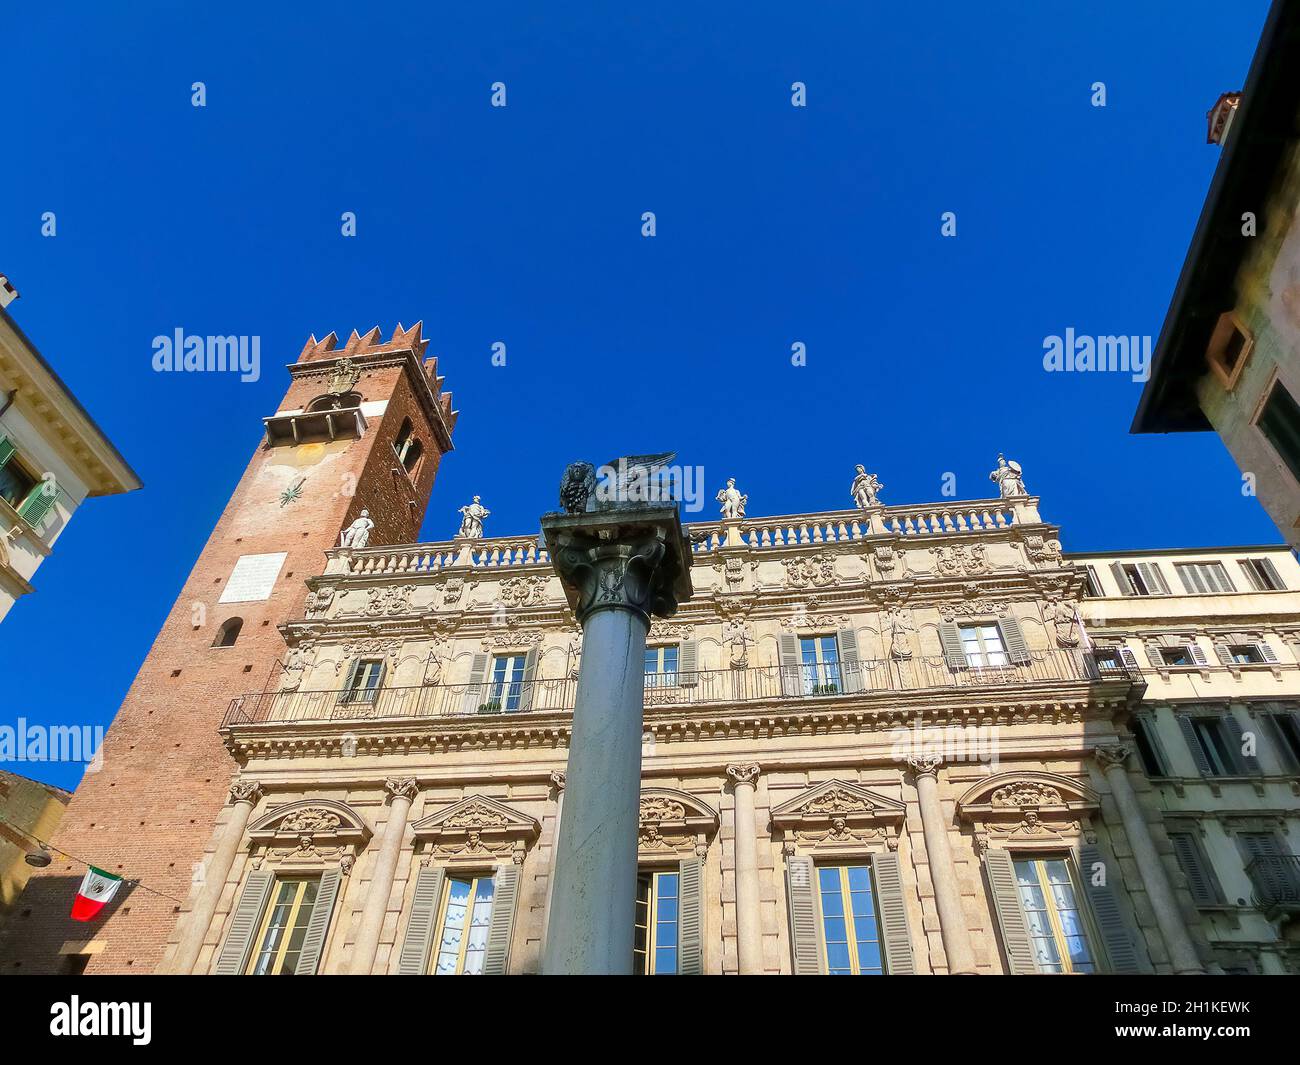 Verona, Italy - September 22, 2014: The winged lion of St Mark, symbol of the Venetian Republic, in Piazza delle Erbe, Verona on September 22, 2014 Stock Photo